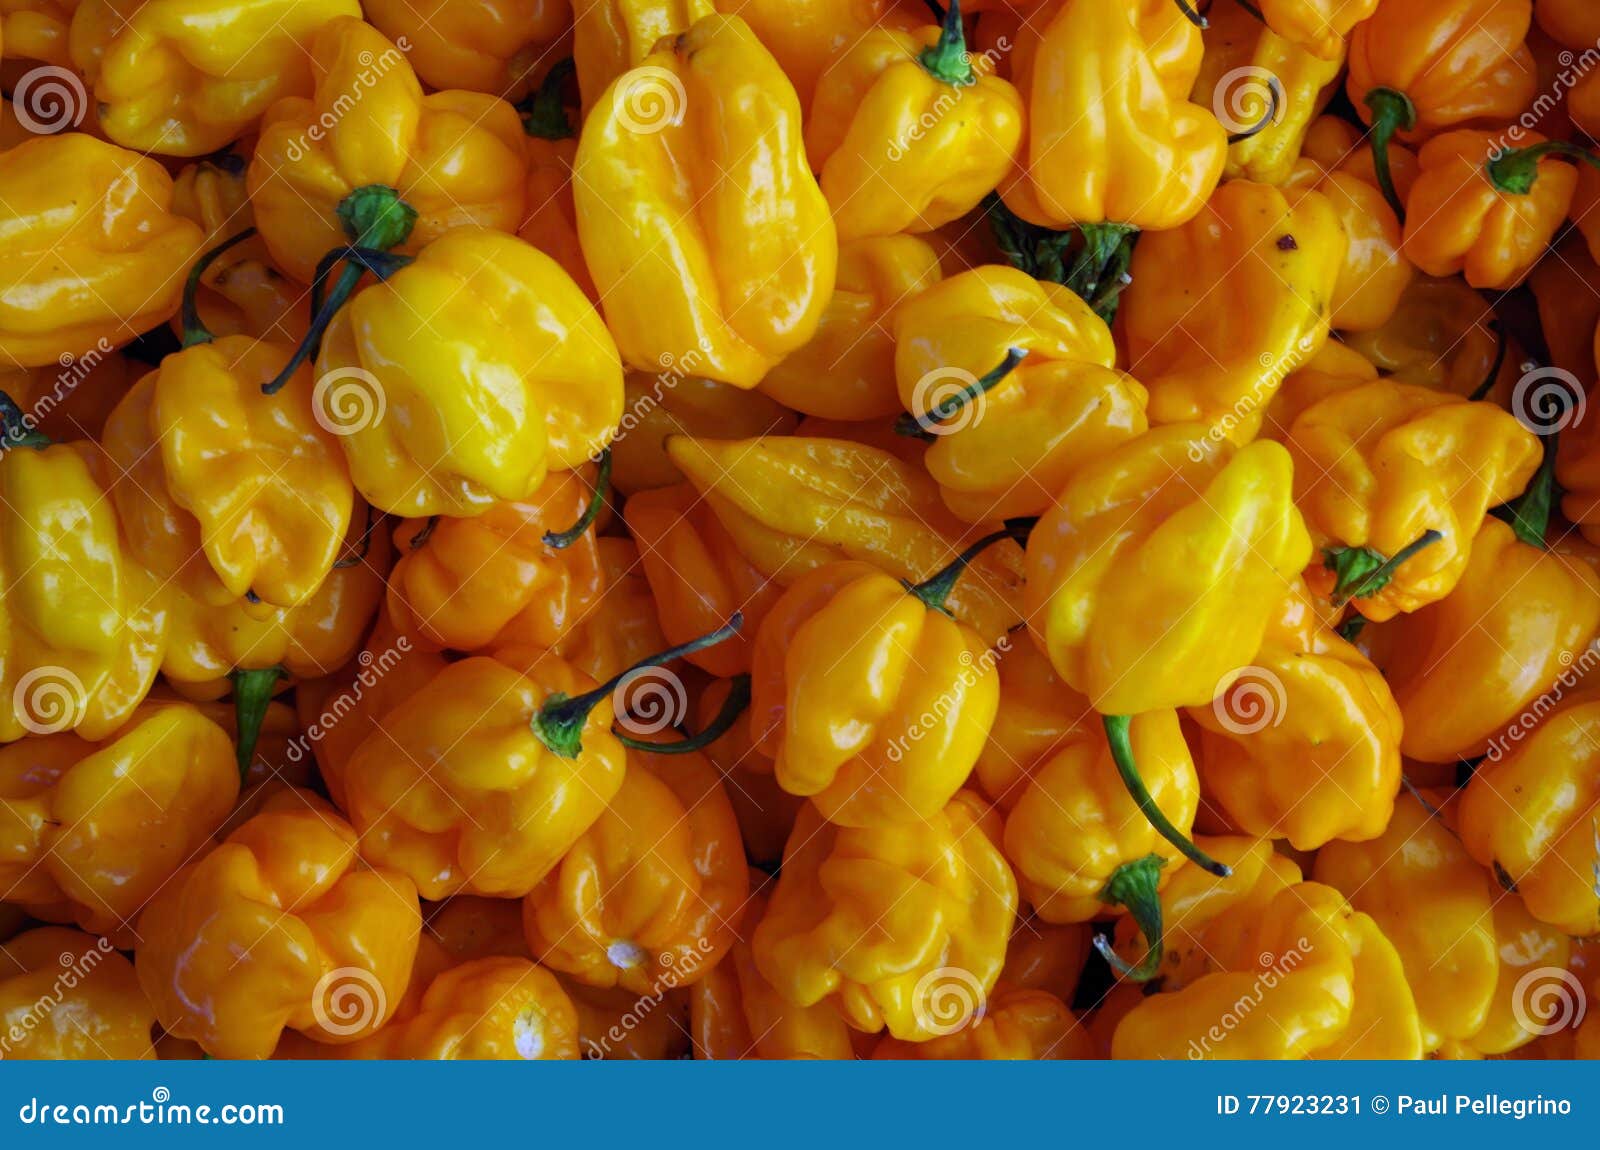 habanero yellow hot peppers pattern view from above